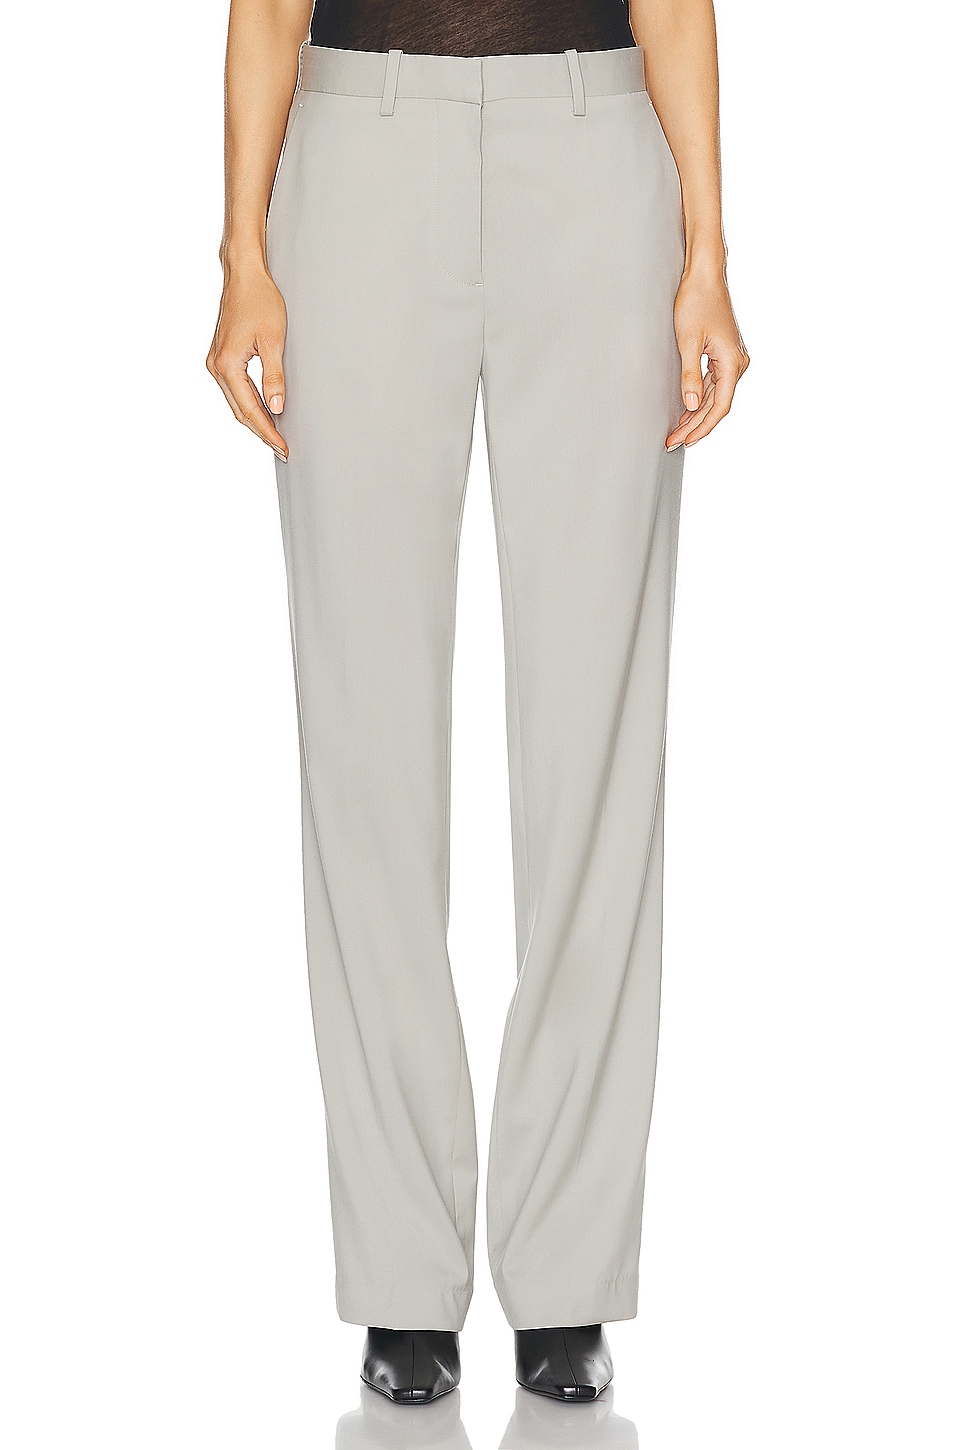 Image 1 of Helmut Lang Flat Front Pant in Sand